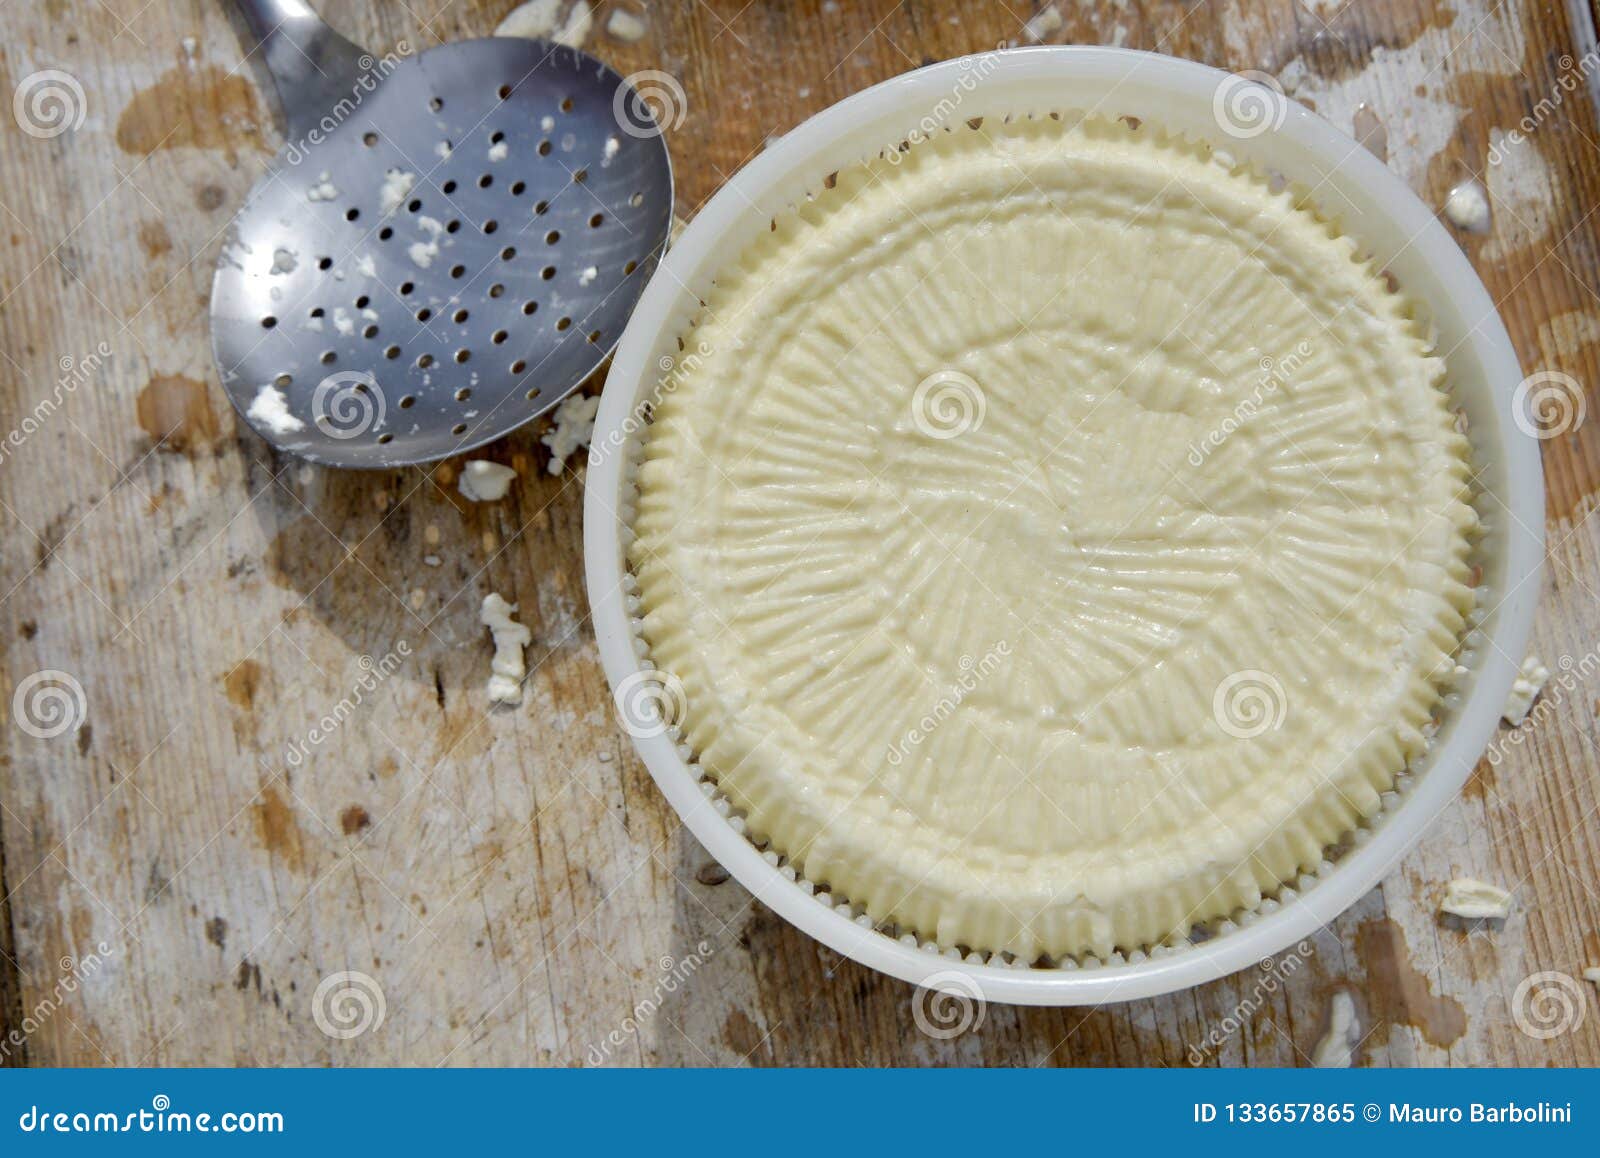 production of artisanal cheese